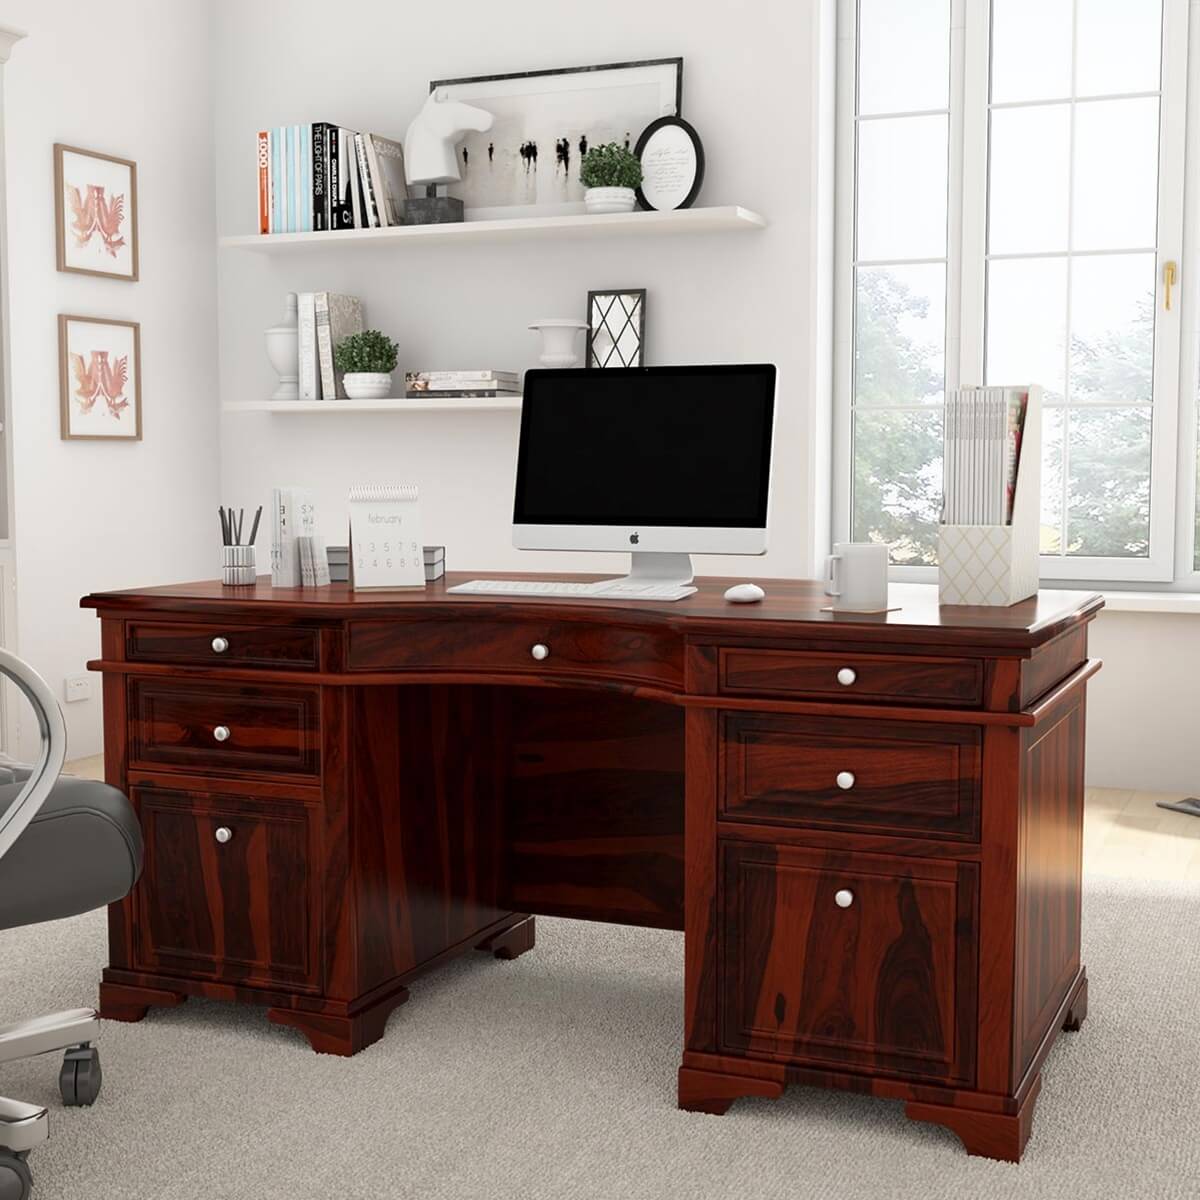 https://www.sierralivingconcepts.com/images/thumbs/0398186_victorian-style-rustic-66-inch-solid-wood-home-office-executive-desk.jpeg